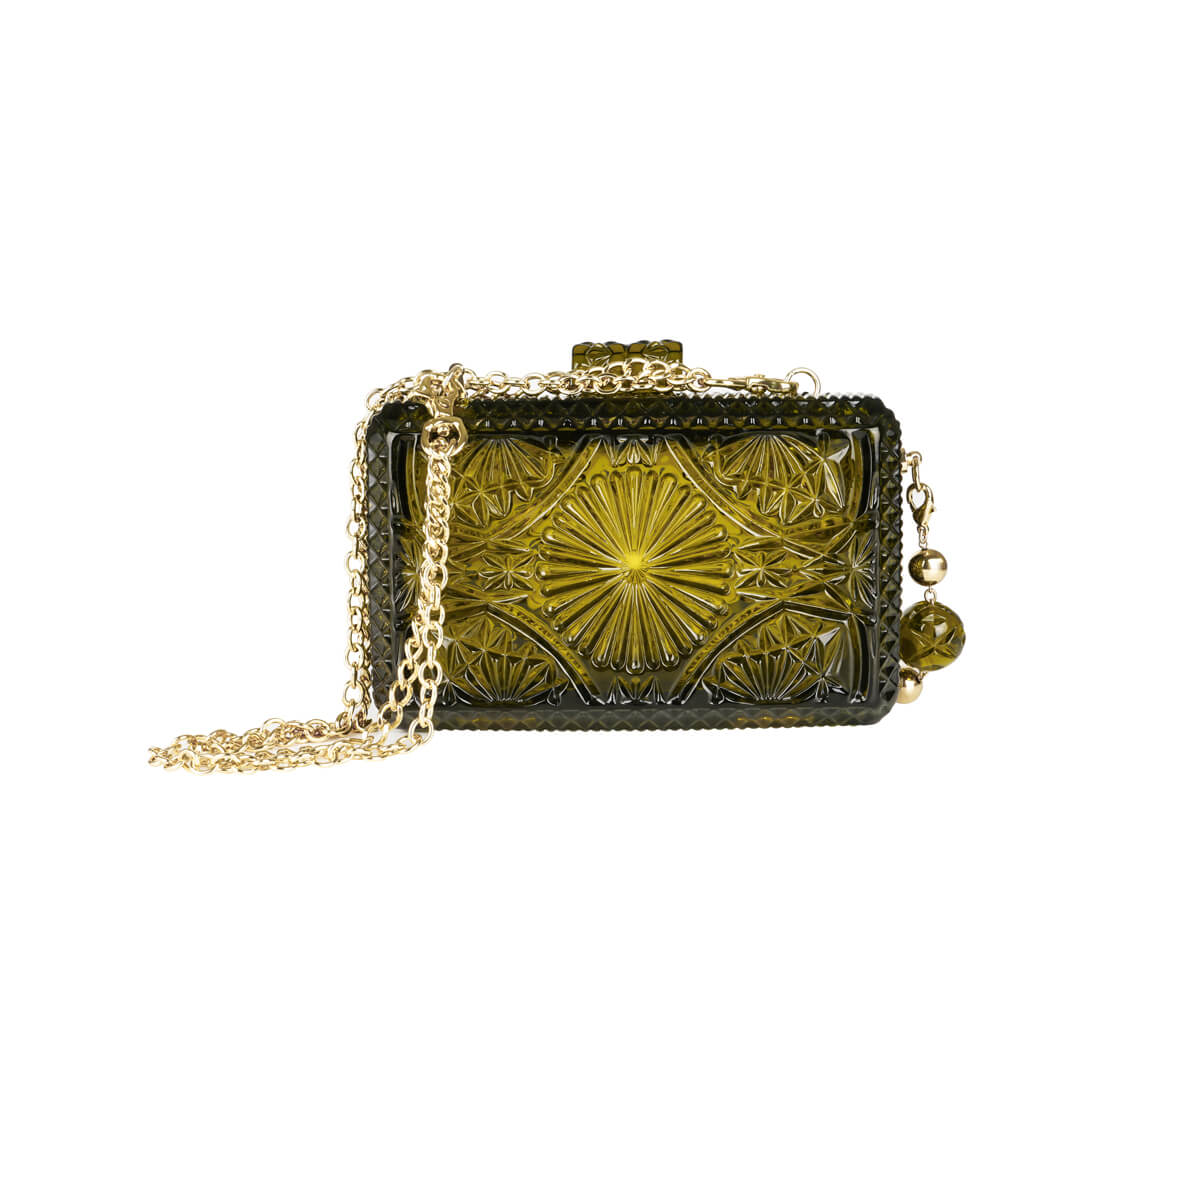 NEW IN Rectangle Clutch Olive